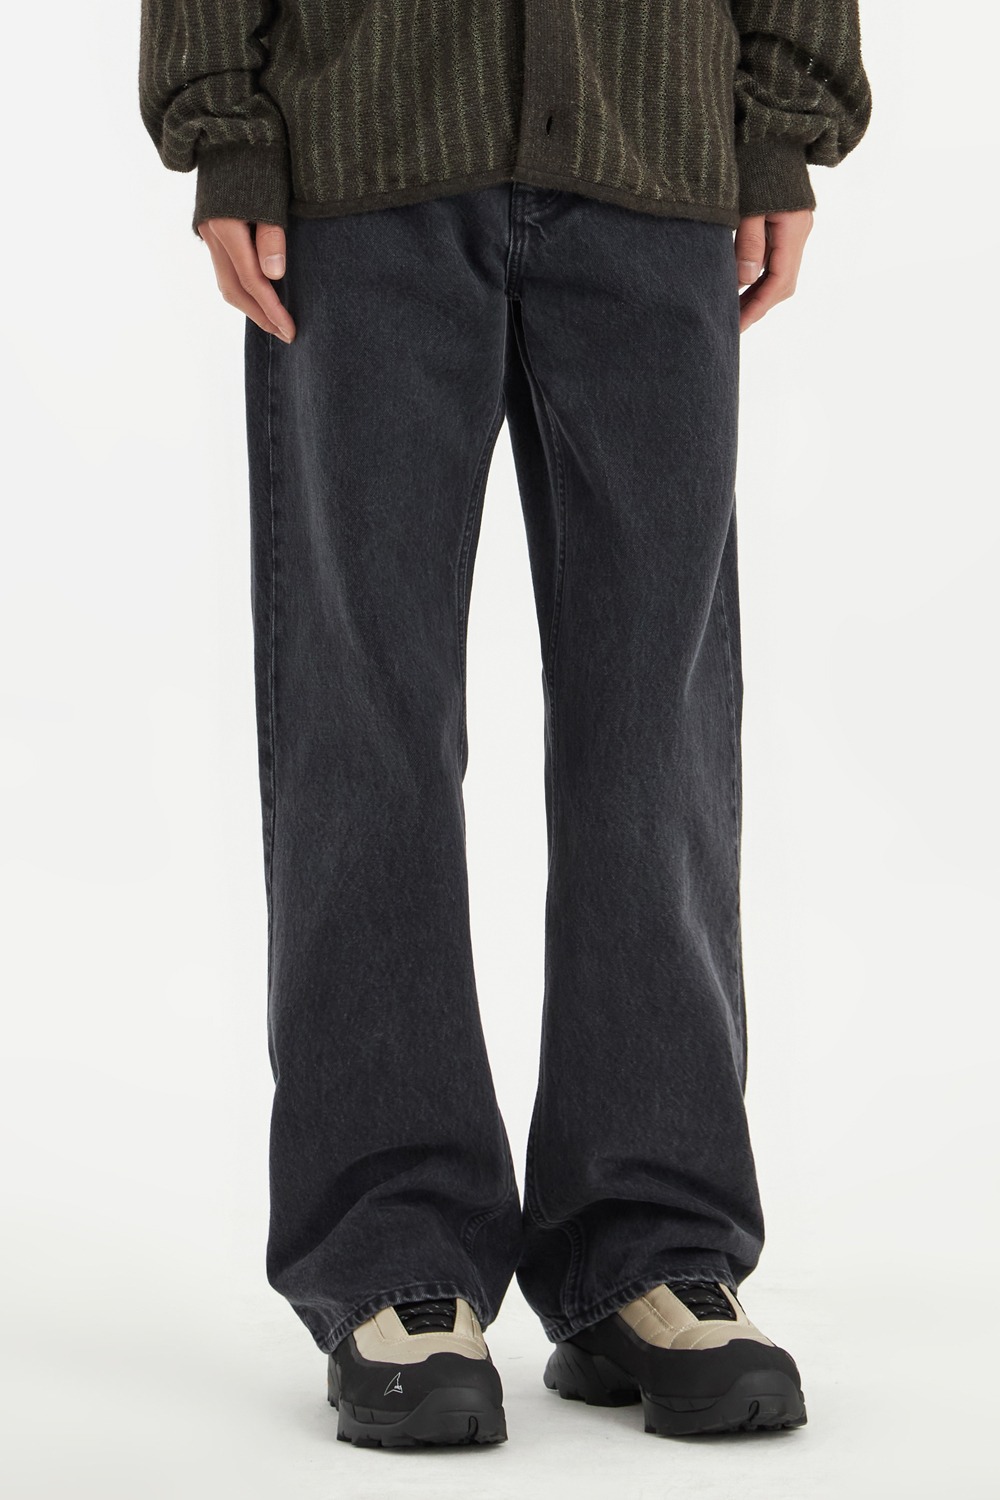 Rush Jeans - Washed Black